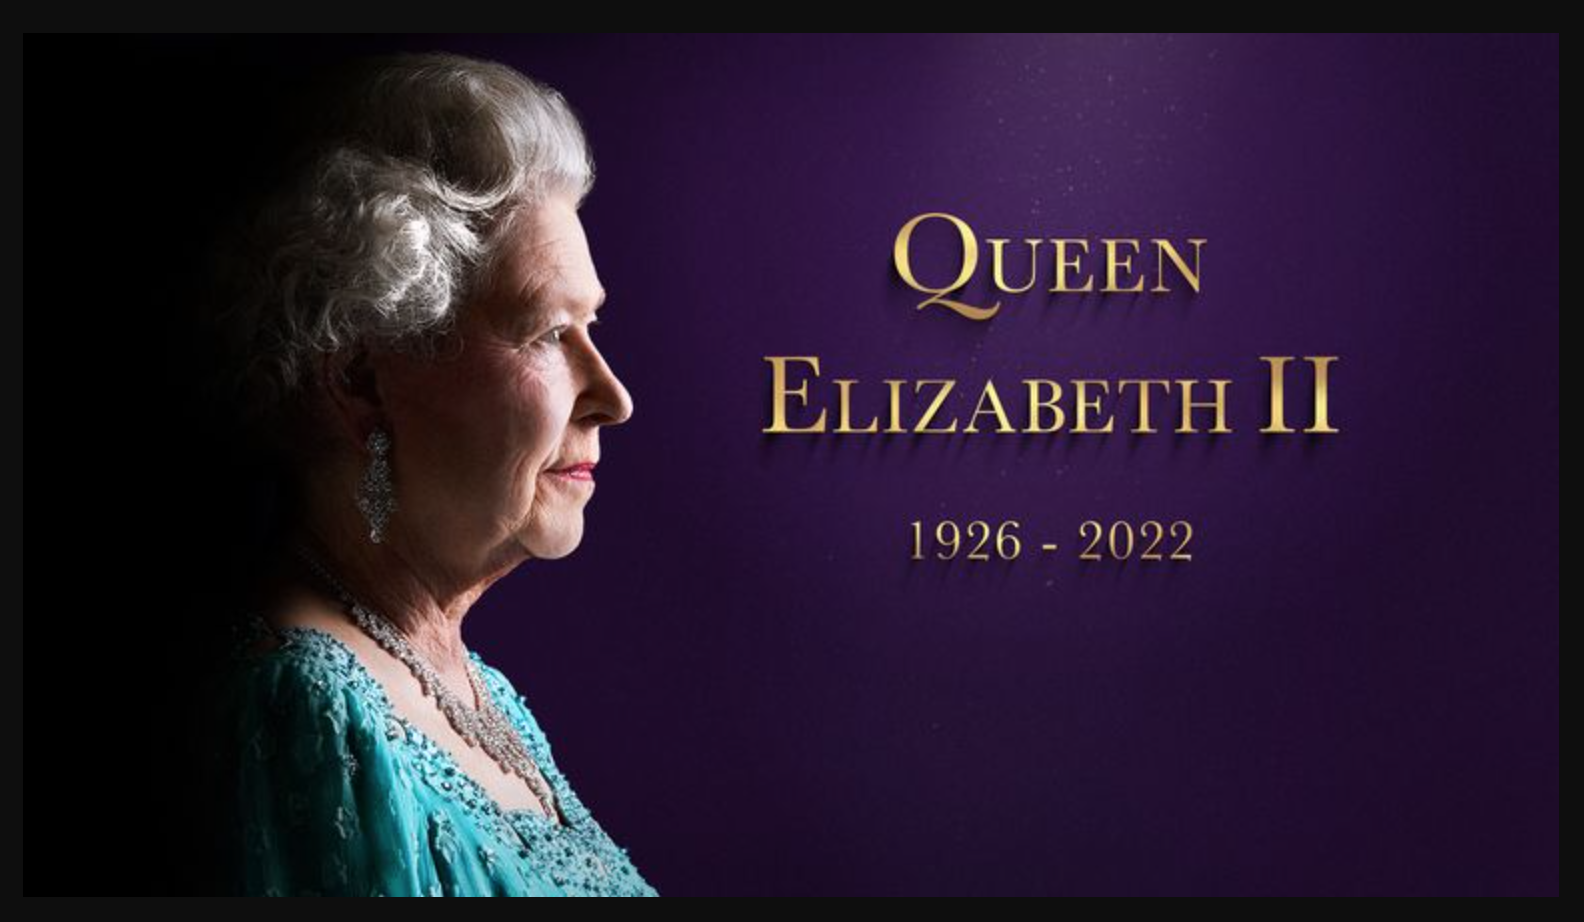 Queen Elizabeth, queen Elizabeth death, queen Elizabeth funeral, how long did queen Elizabeth live, Queen Elizabeth II, Queen Elizabeth II death anniversary, Queen Elizabeth II funeral, Queen Elizabeth II death date, Queen Elizabeth II remembered, Queen Elizabeth II tribute, queen Elizabeth death tribute, royal family, royal family latest news, royal family news today,